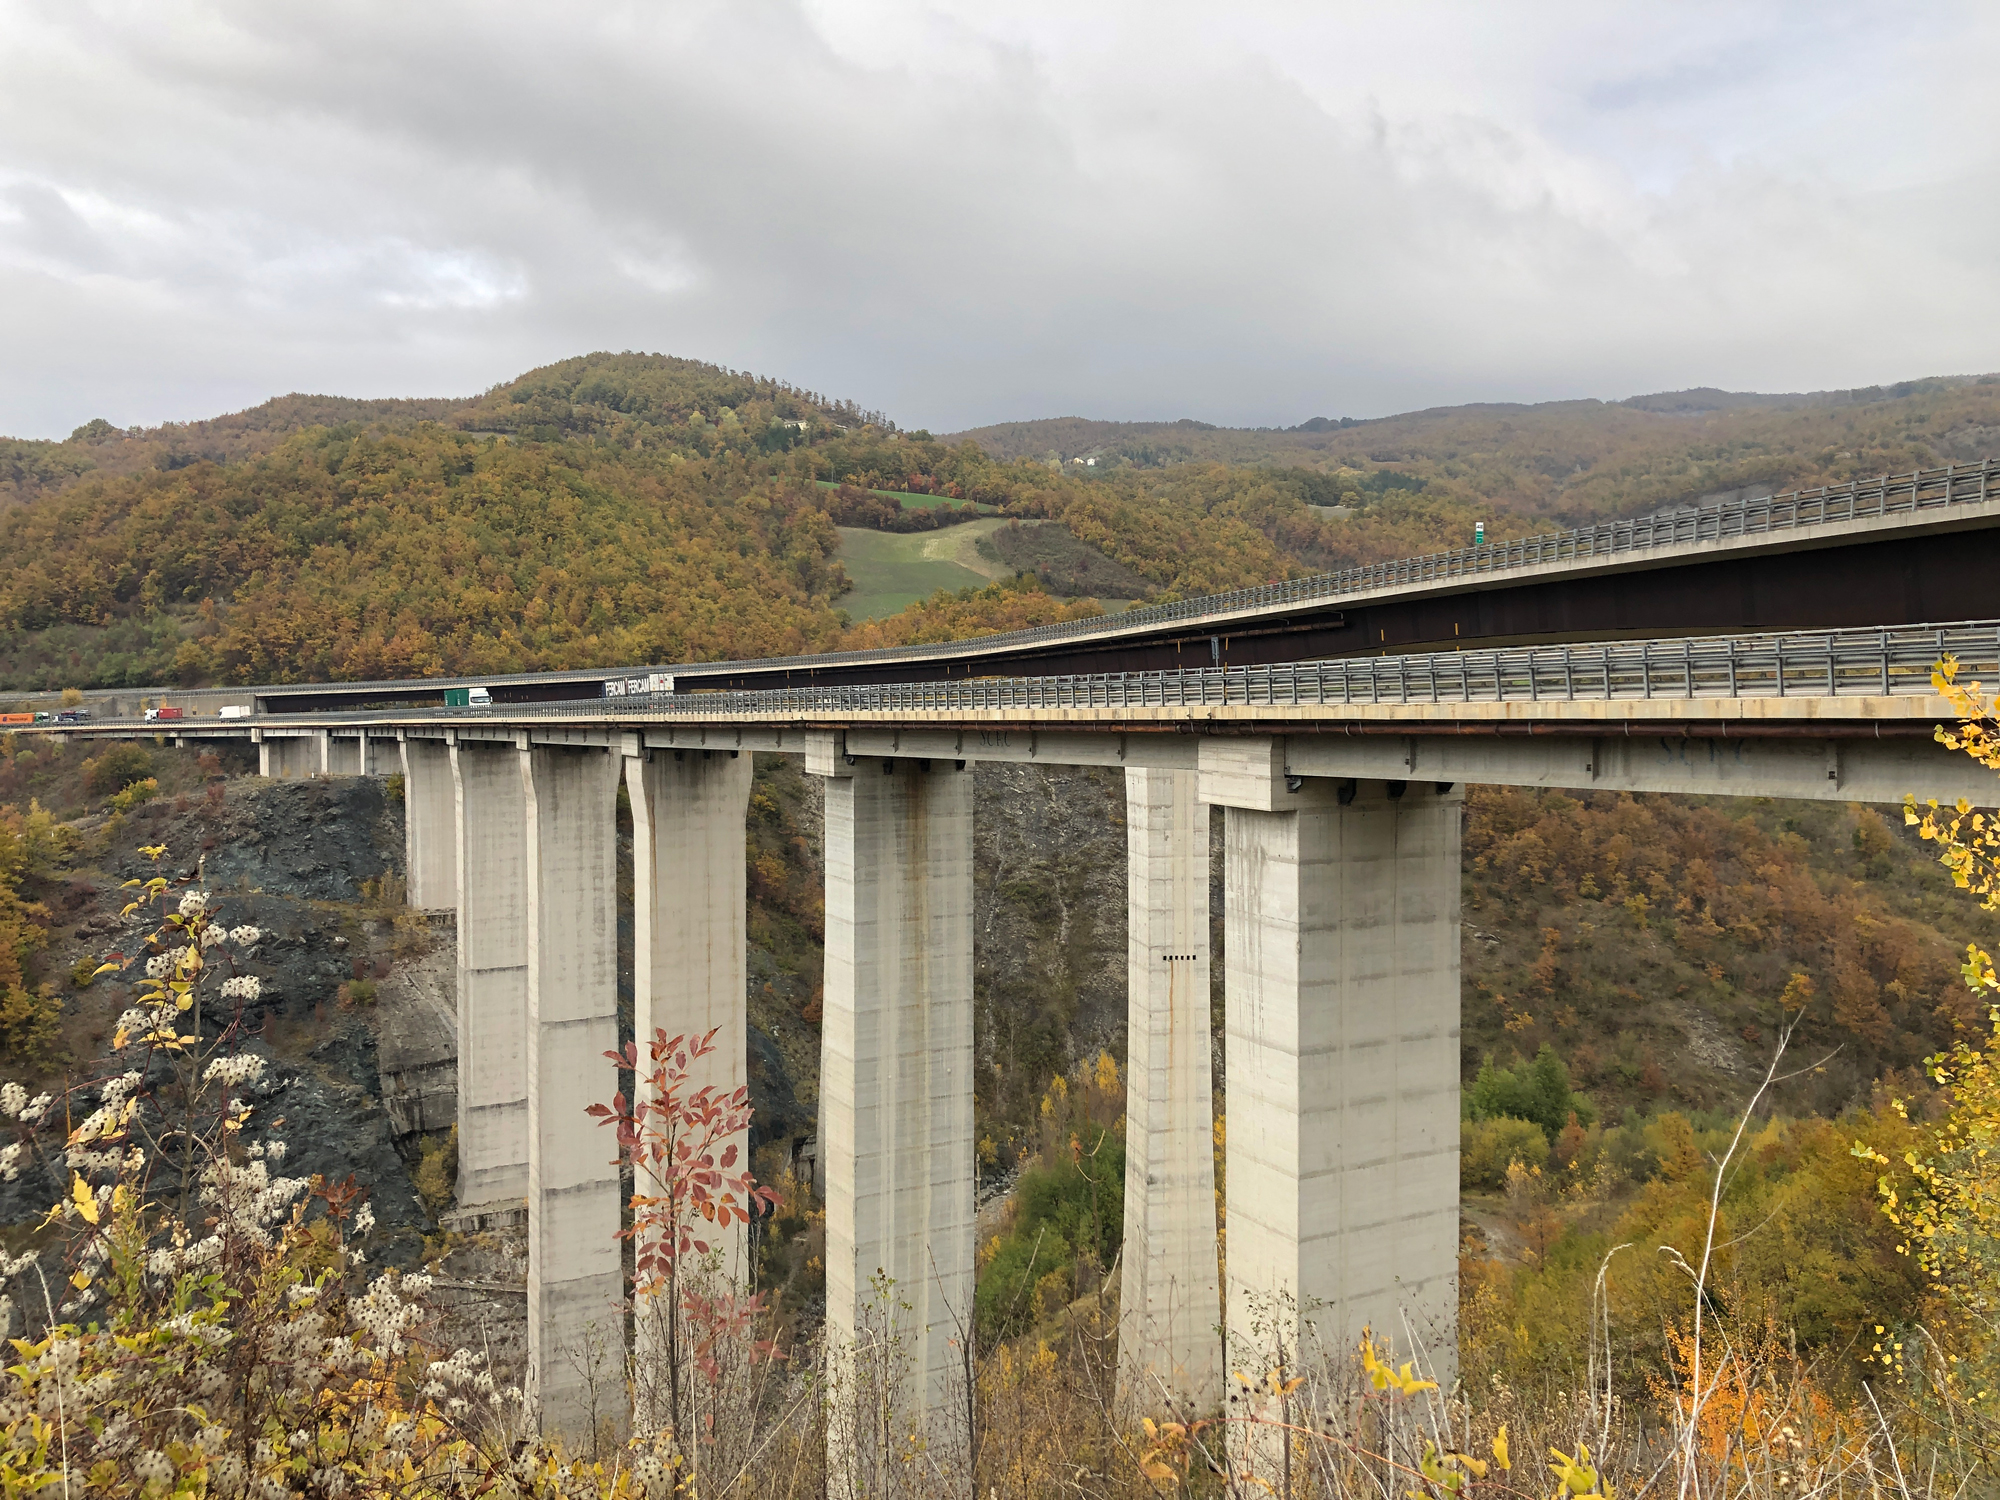 CONCRETE/STEEL HYBRID SINGLE CELL BOX WITH EXTERNAL POST-TENSIONED CABLES HIGHWAY VIADUCT